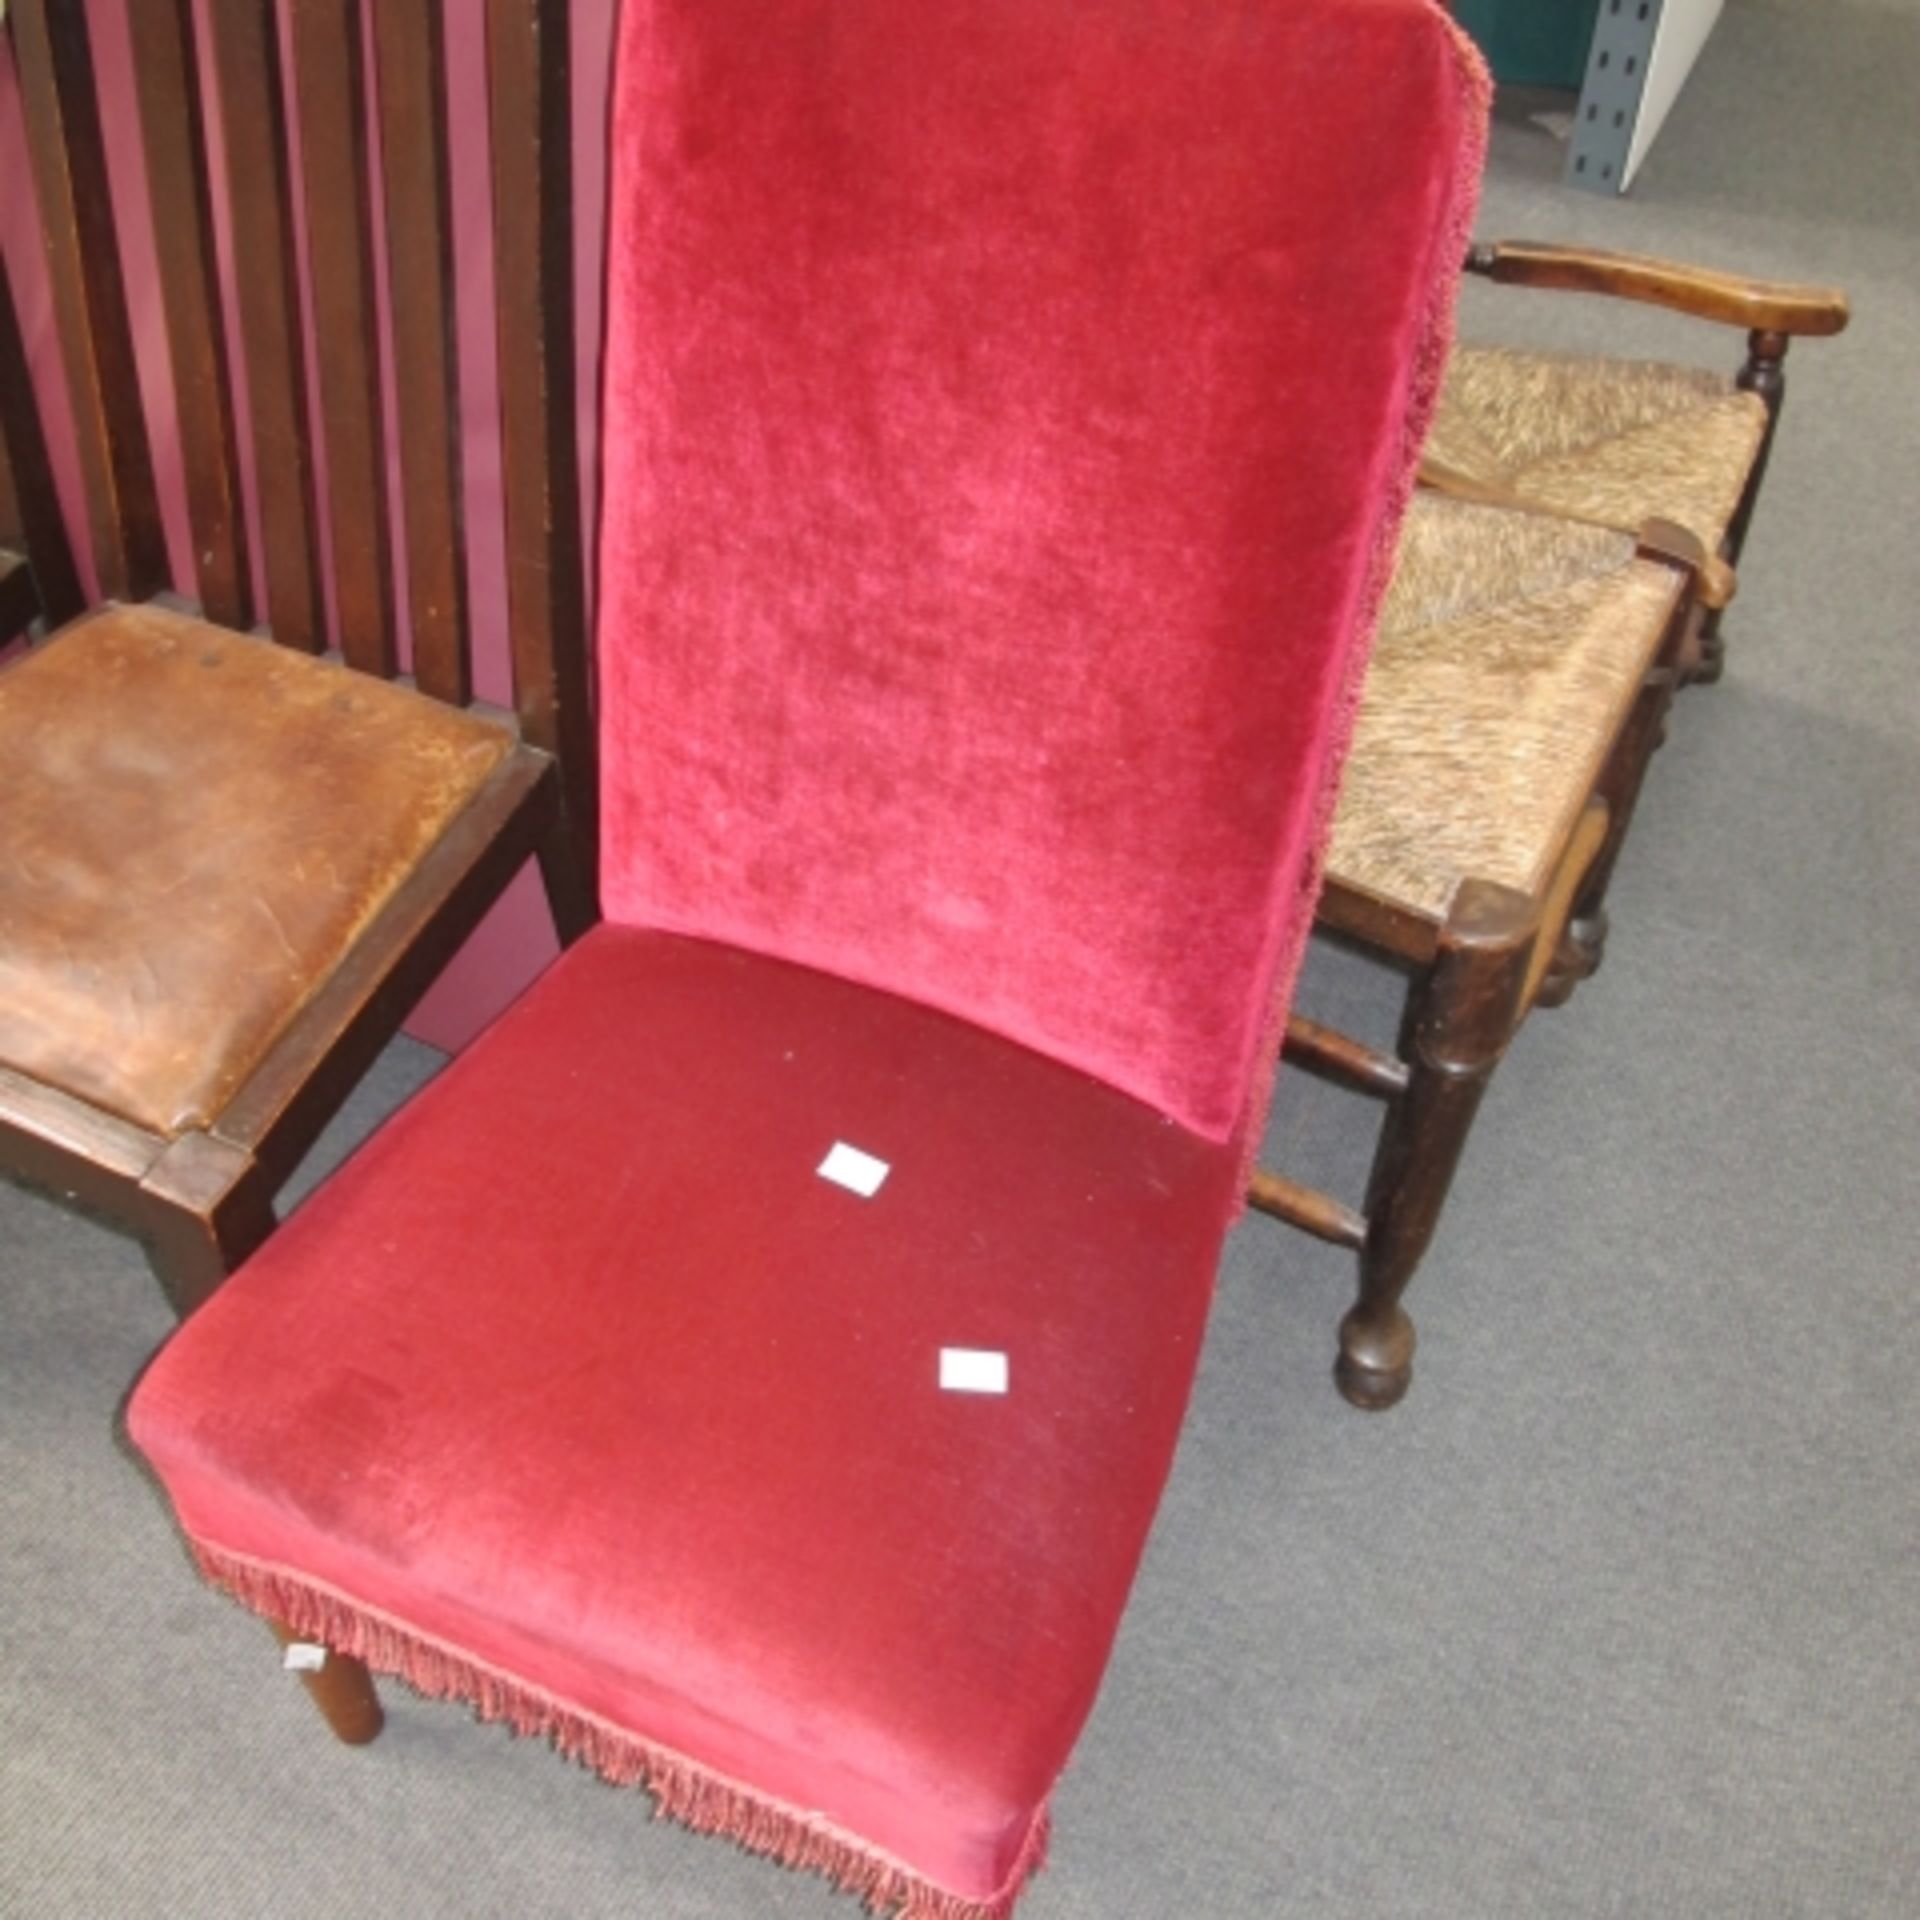 An Upholstered Pink Occasional Chair (est. £20-£40)